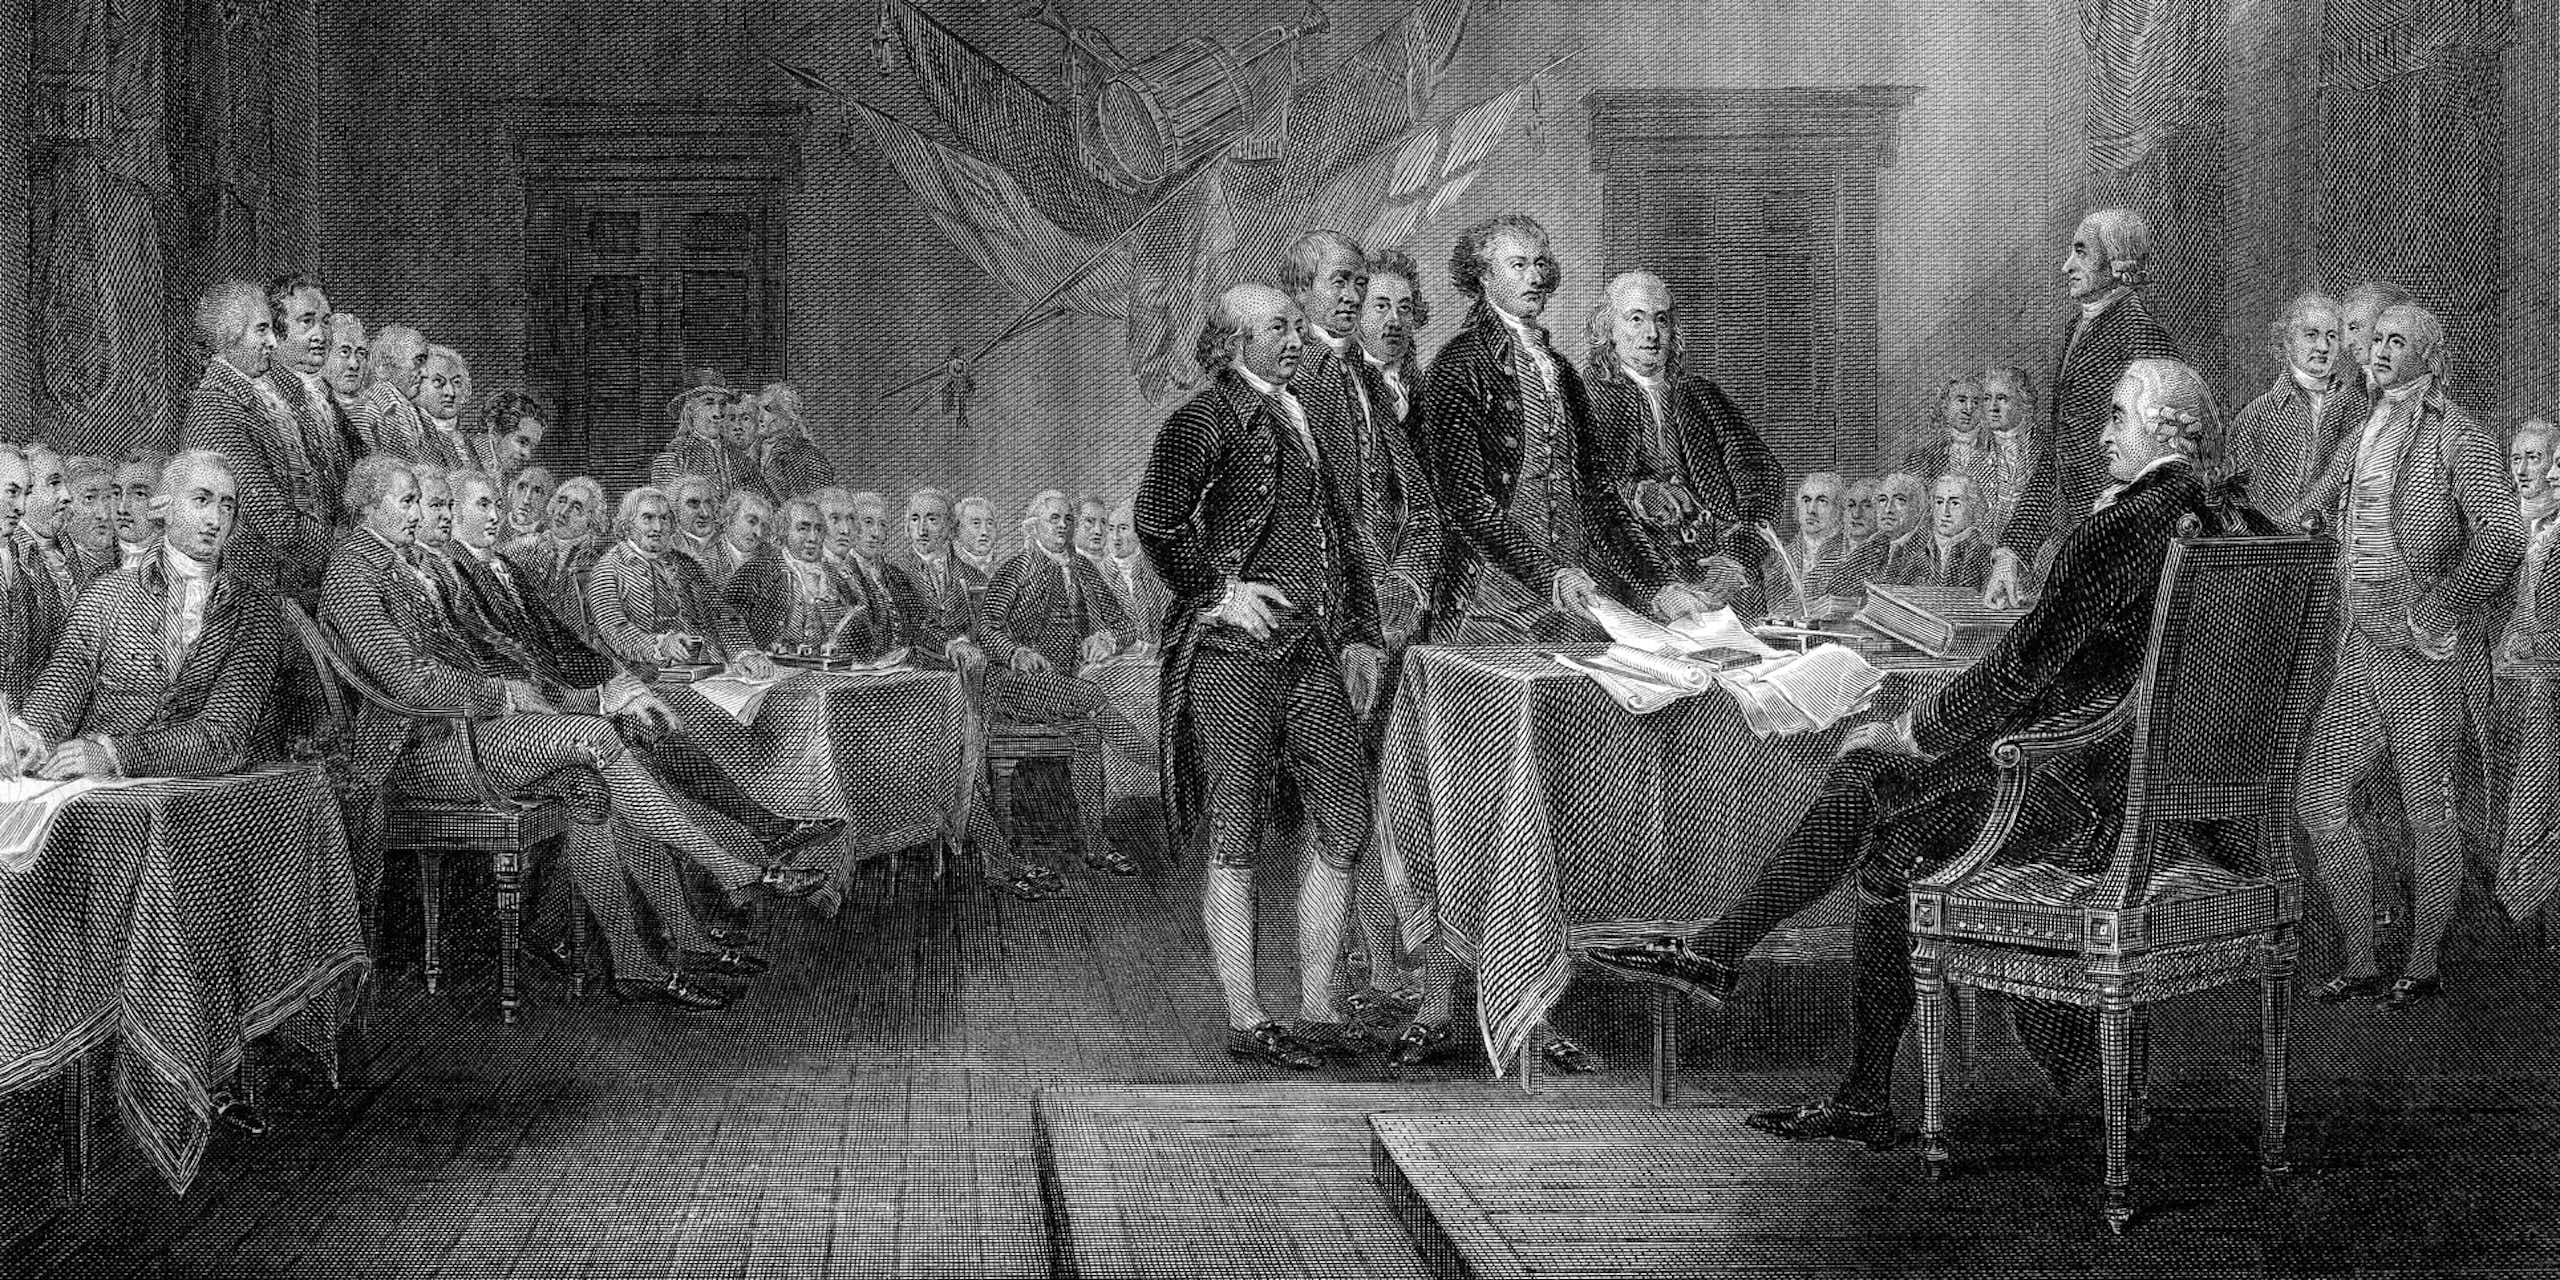 A steel engraving shows the Second Continental Congress adopting the Declaration of Independence on July 4, 1776.